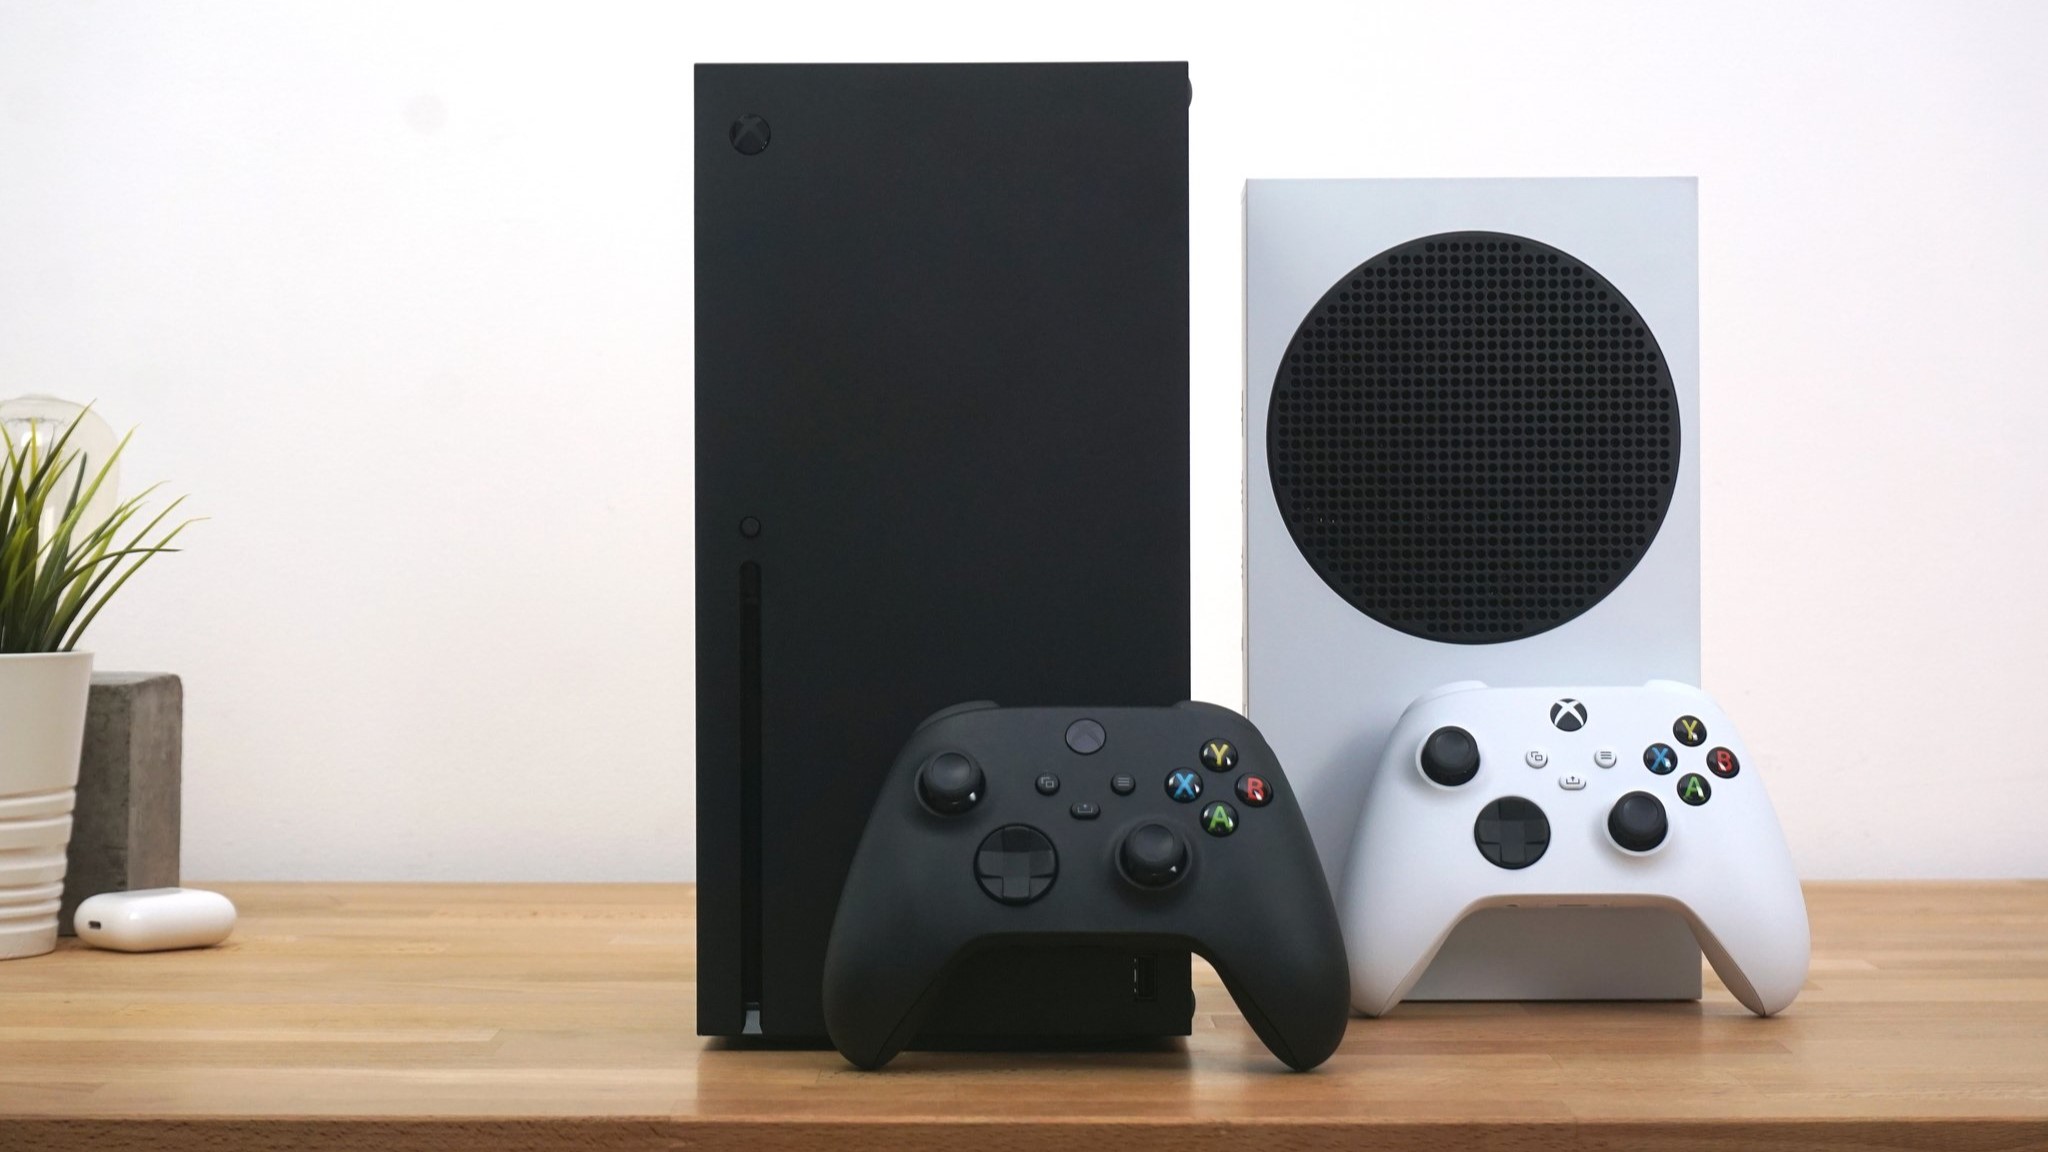 Janice voordeel Opa Xbox Series X vs. Series S: Which current-gen console should you buy? |  Windows Central